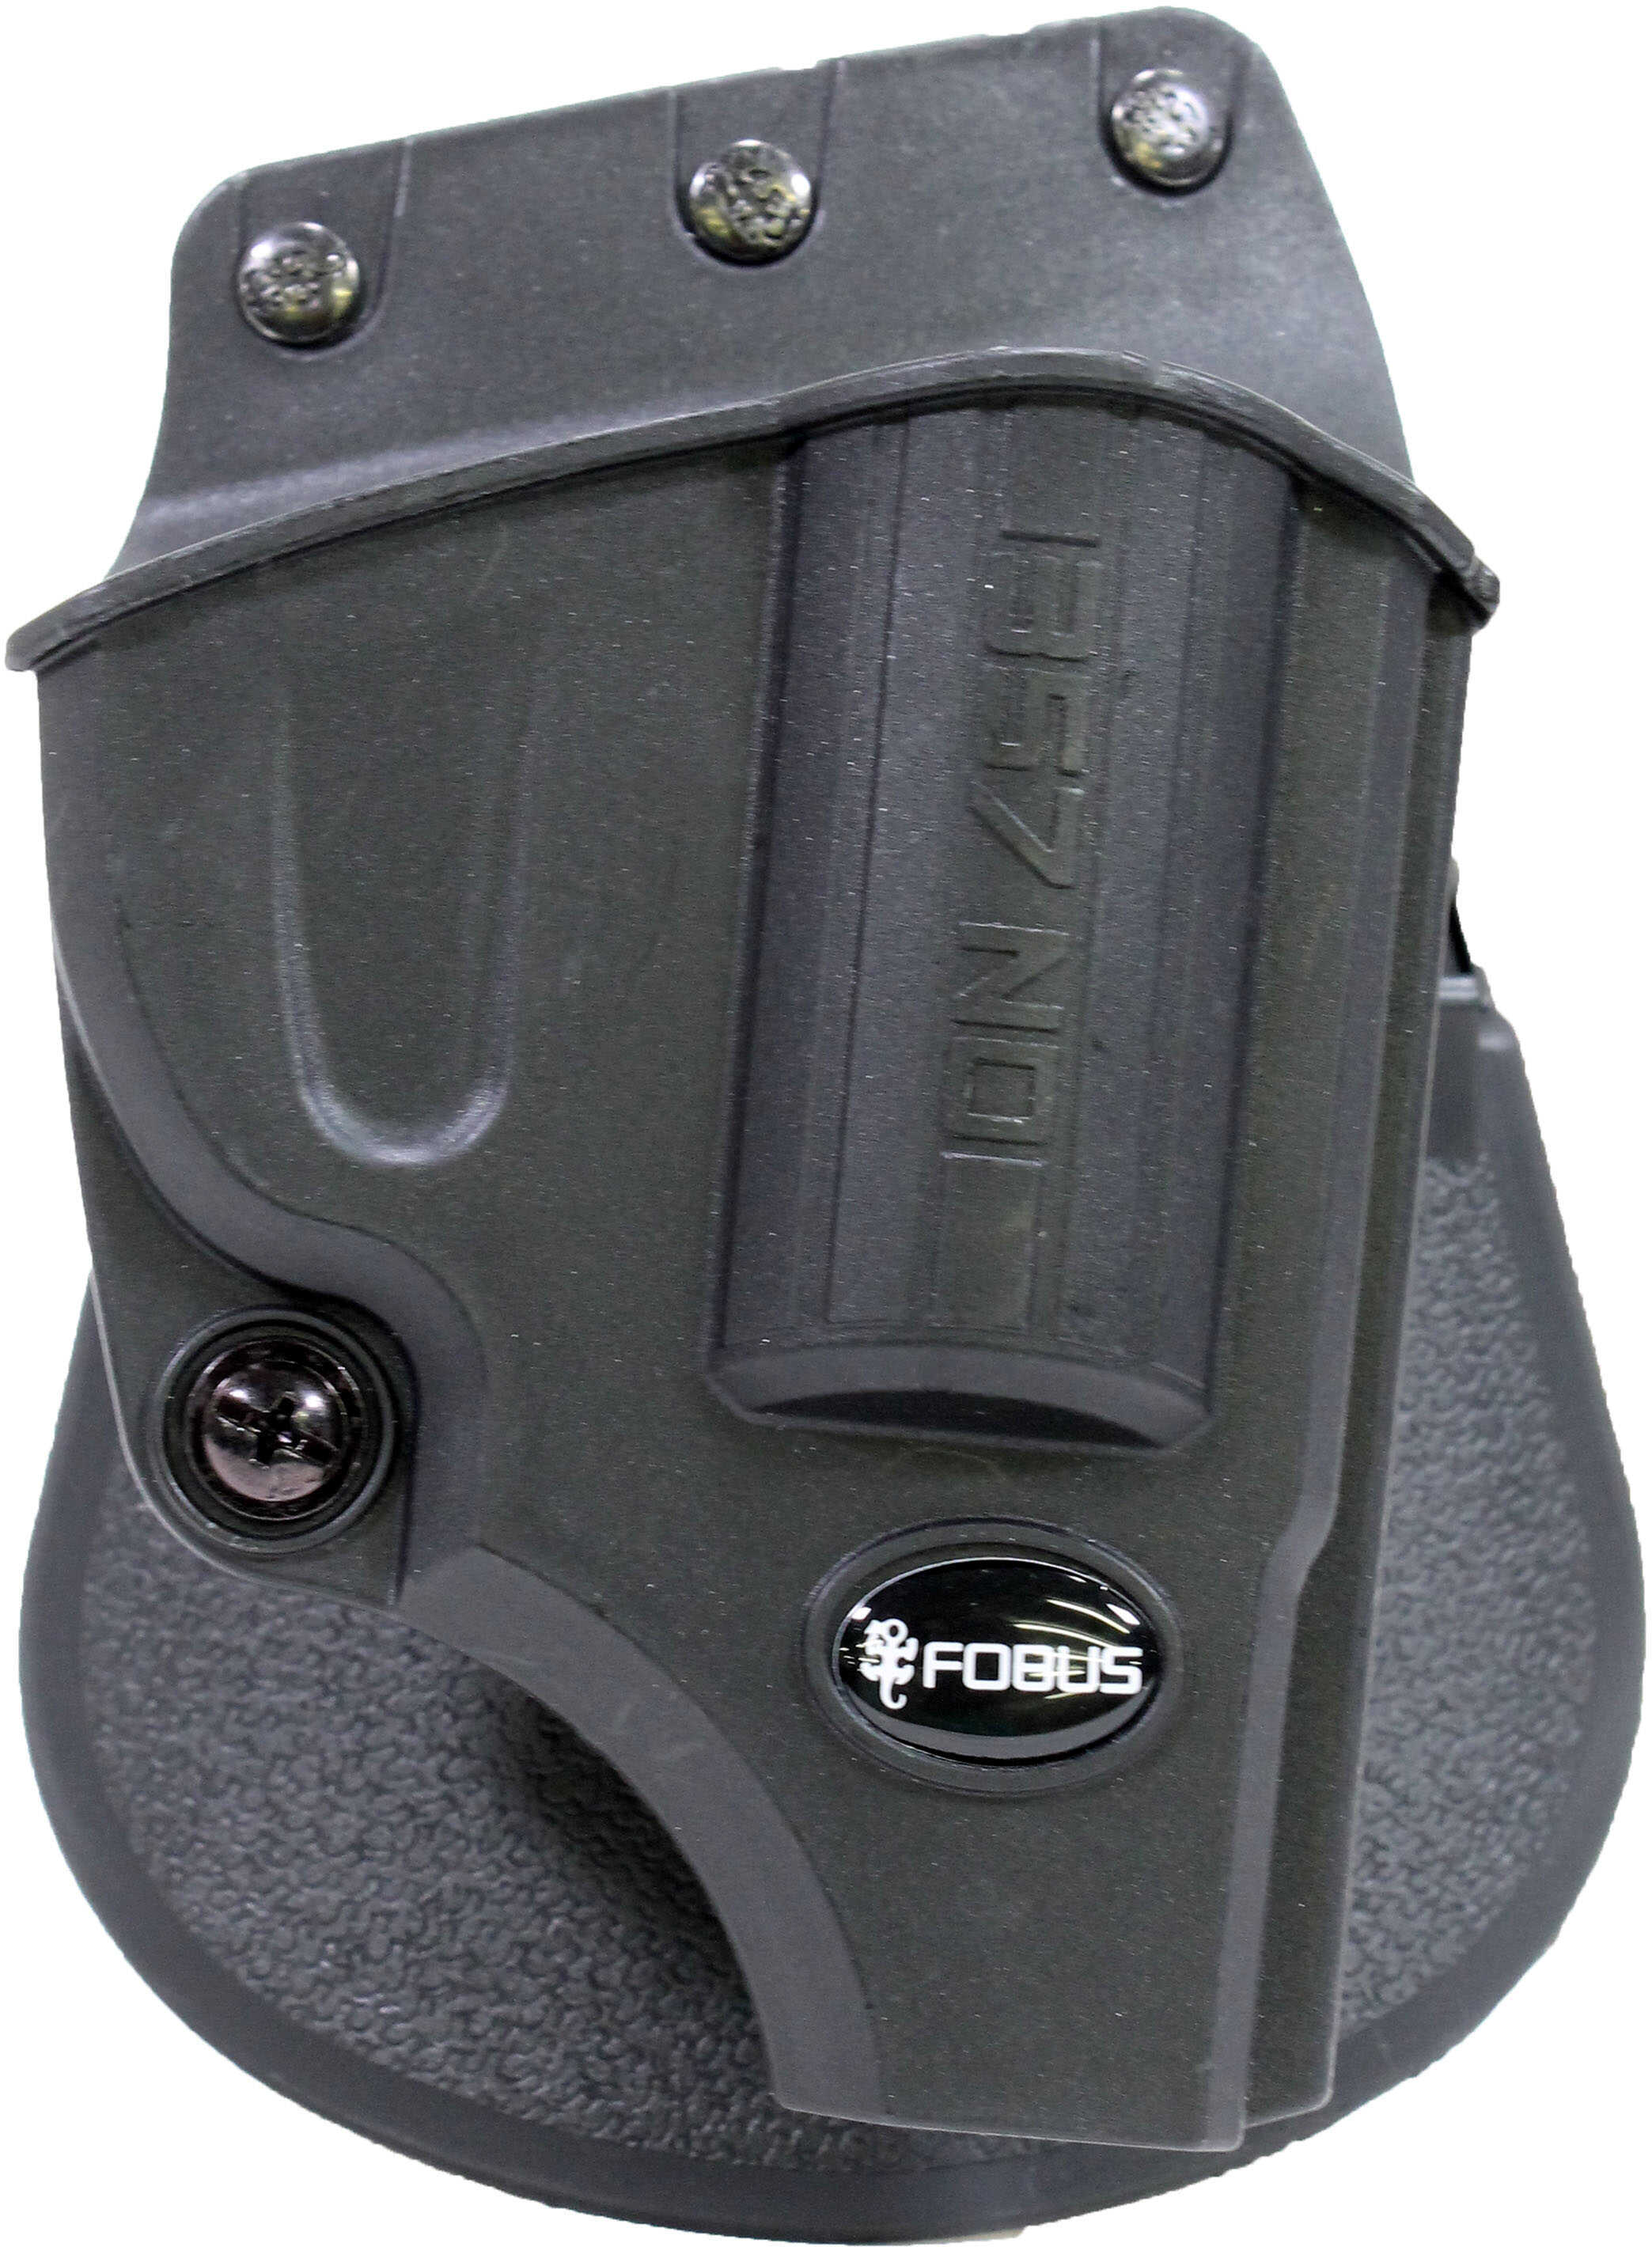 Fobus Evolution Holster Roto Paddle, Smith & Wesson J Frame, Black, Right Hand Md: J357NDRP